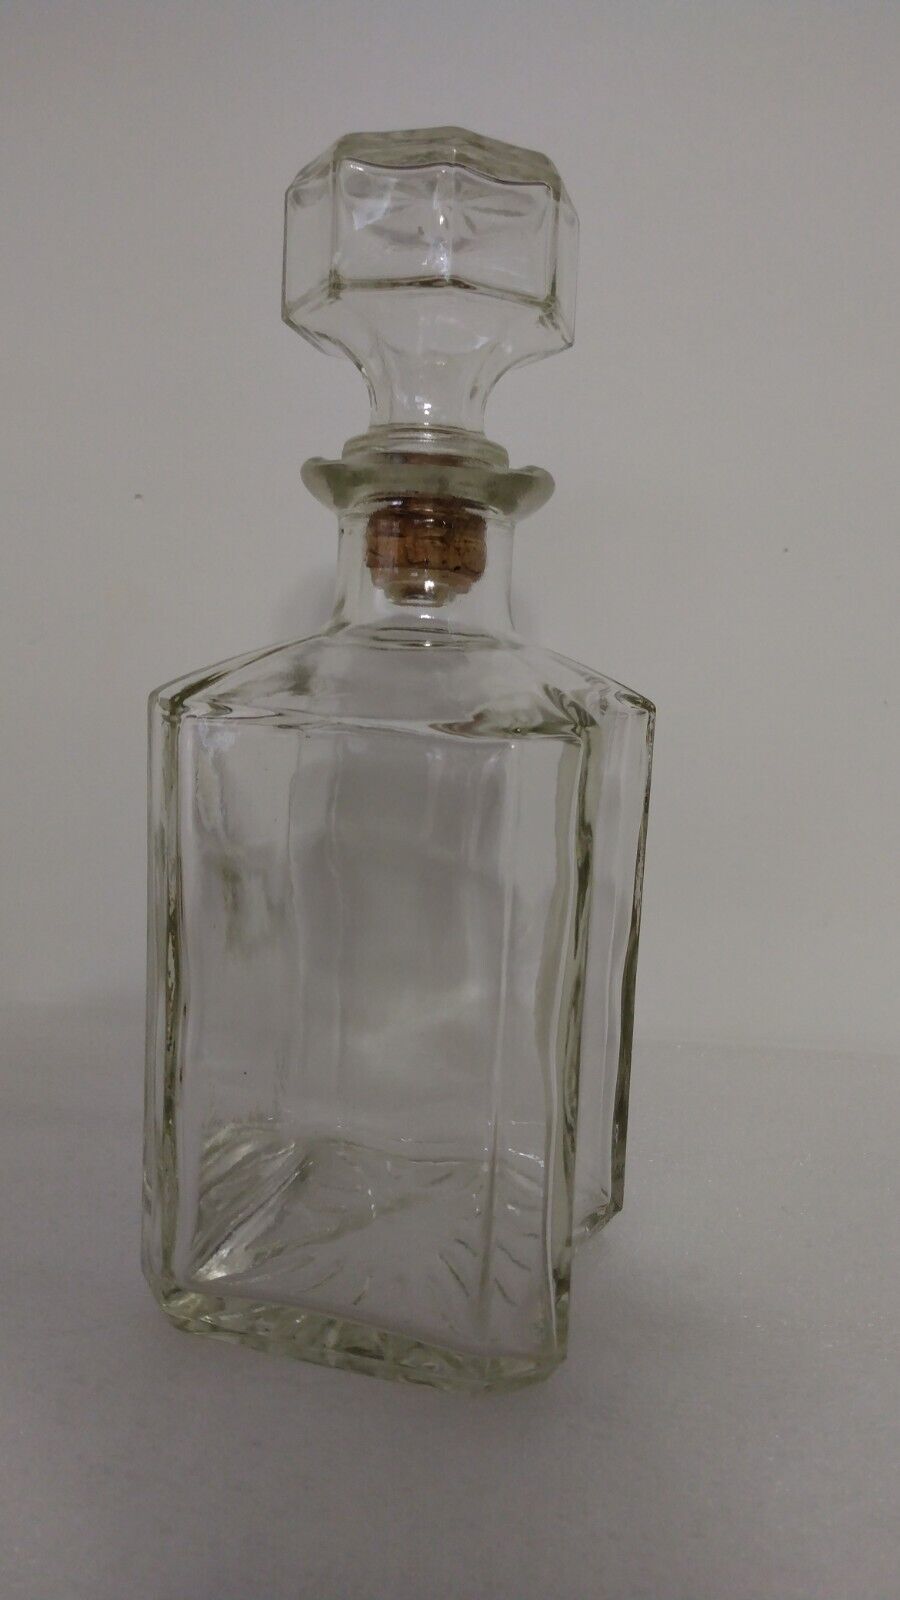 Vtg Dominion Clear Glass Square Liquor Whiskey Decanter With Cork Glass Stopper